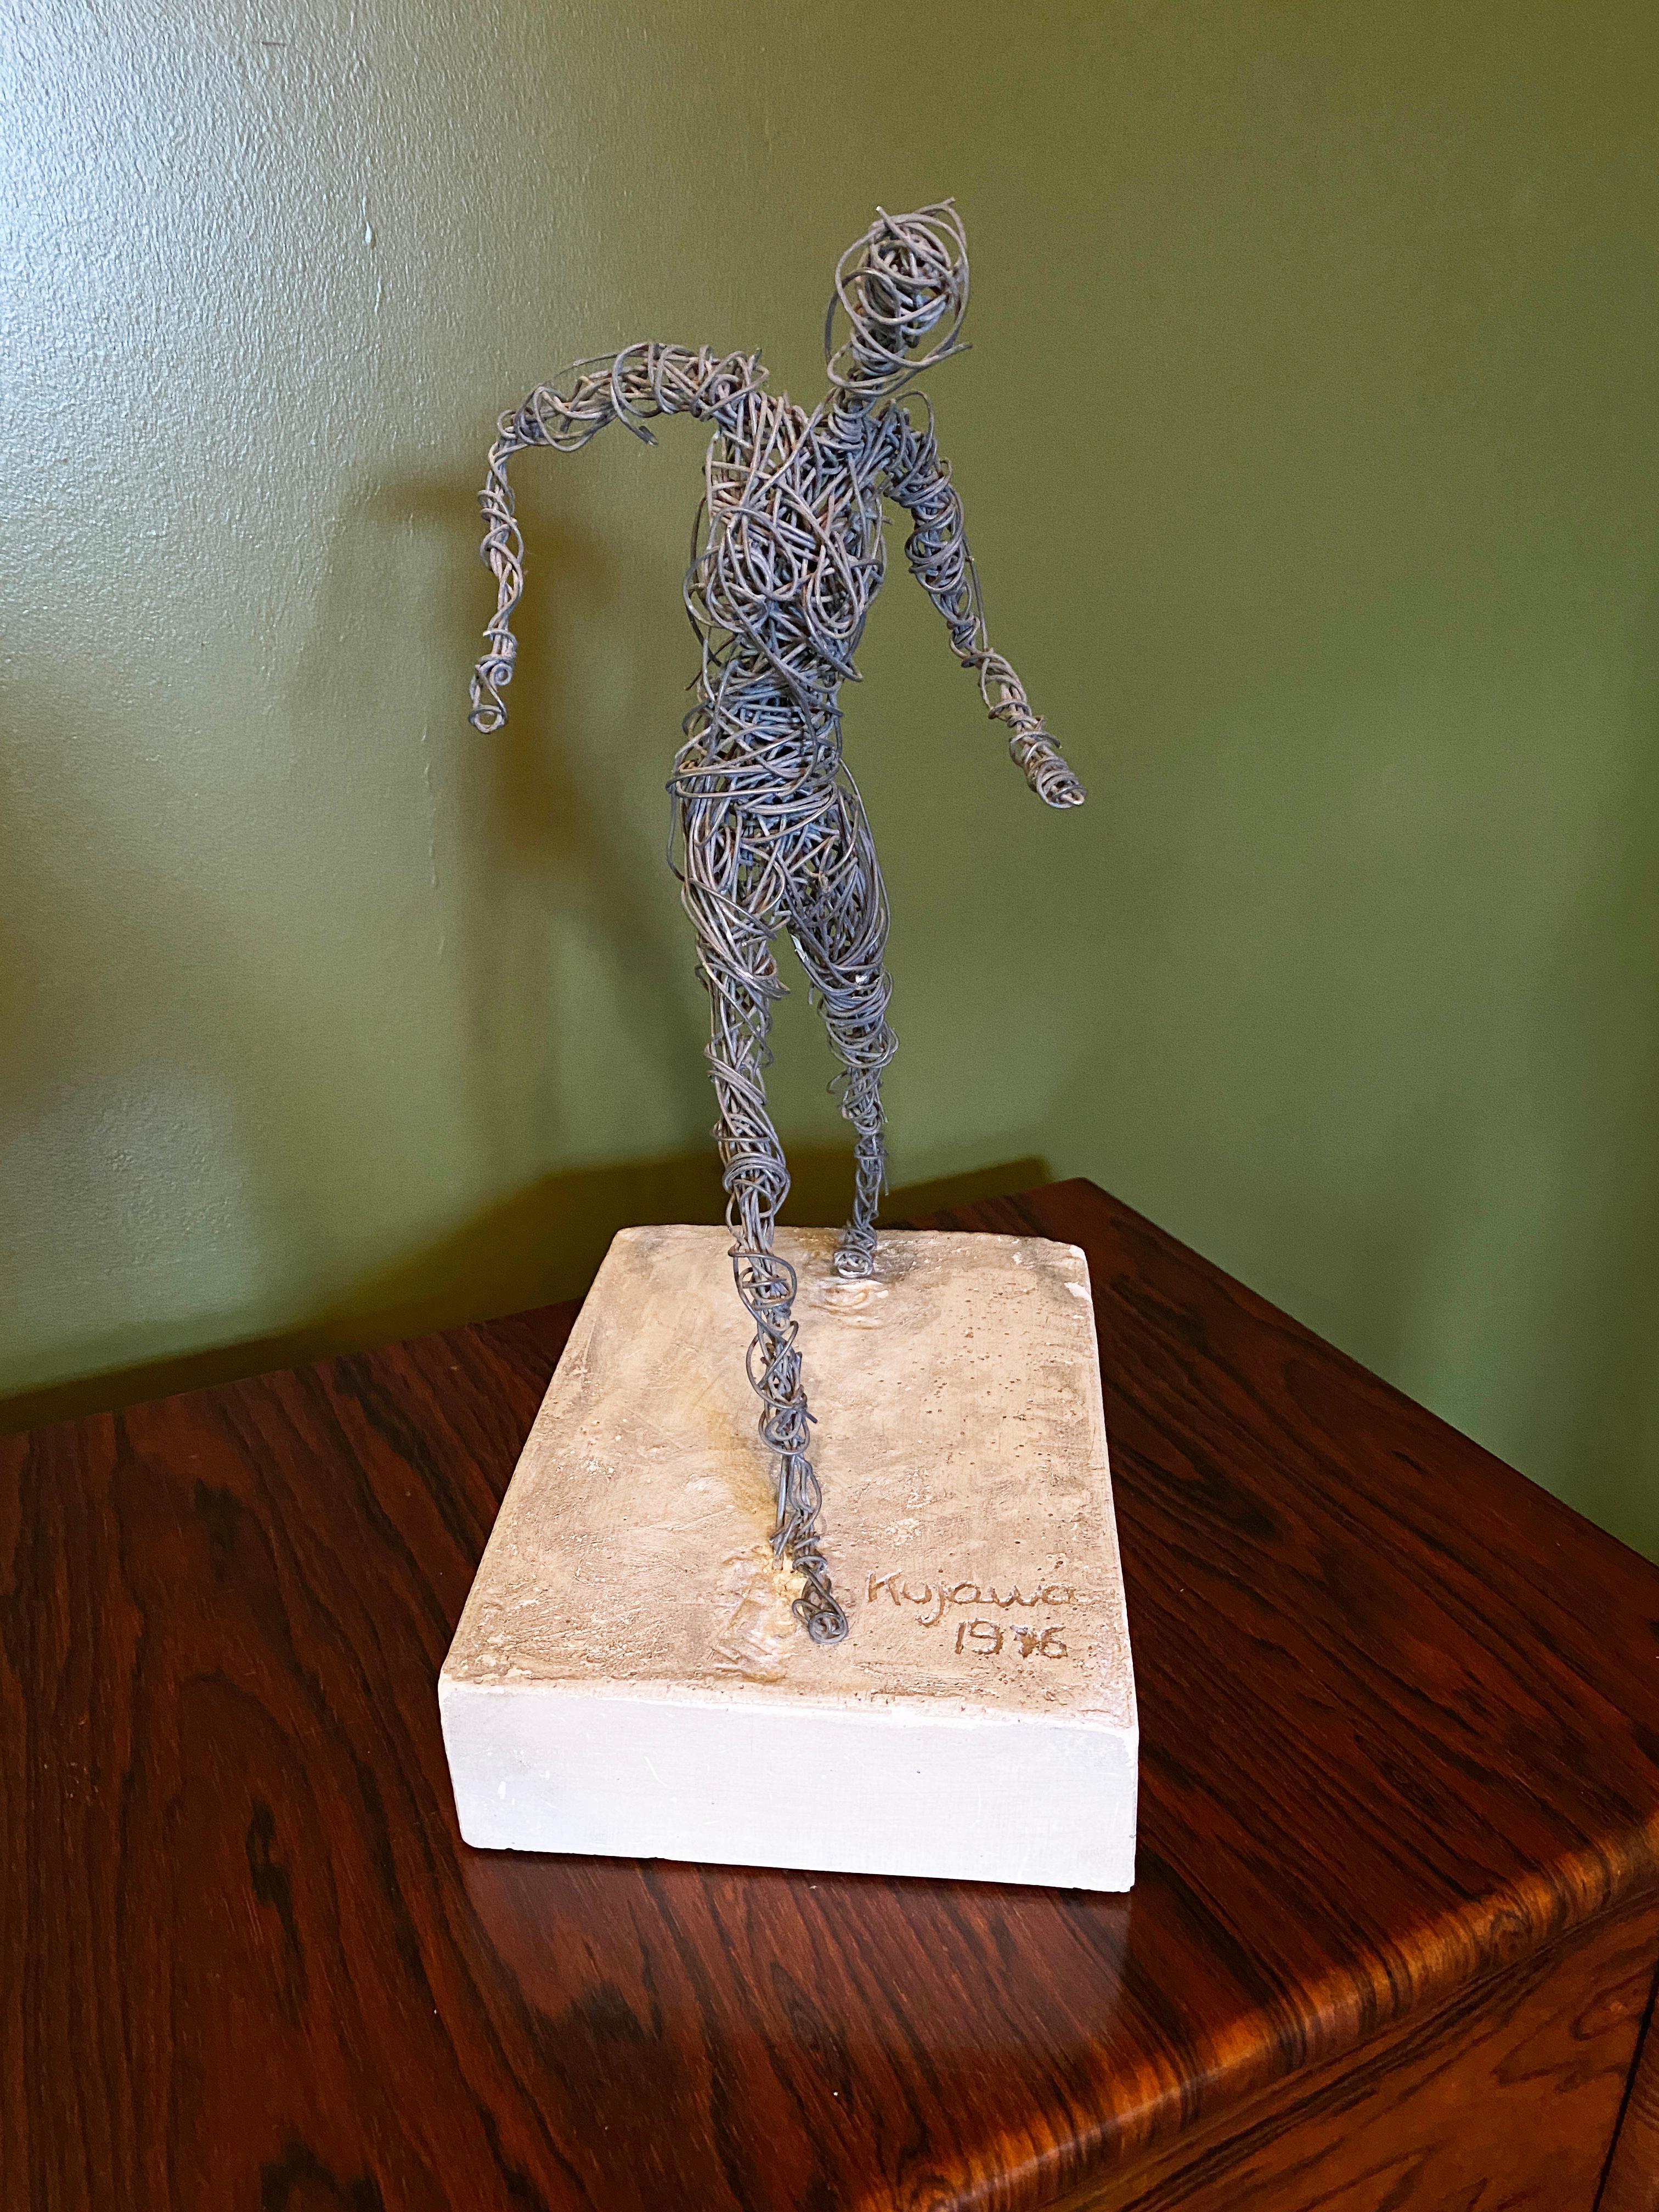 Female figure sculpted in wire on cast concrete base, signed Kujawa 1976. Kujawa was a student of the famed French sculptor Cesar Baldaccini. One of three unique figures available. The three together make a fantastic set.

Other two figures listed